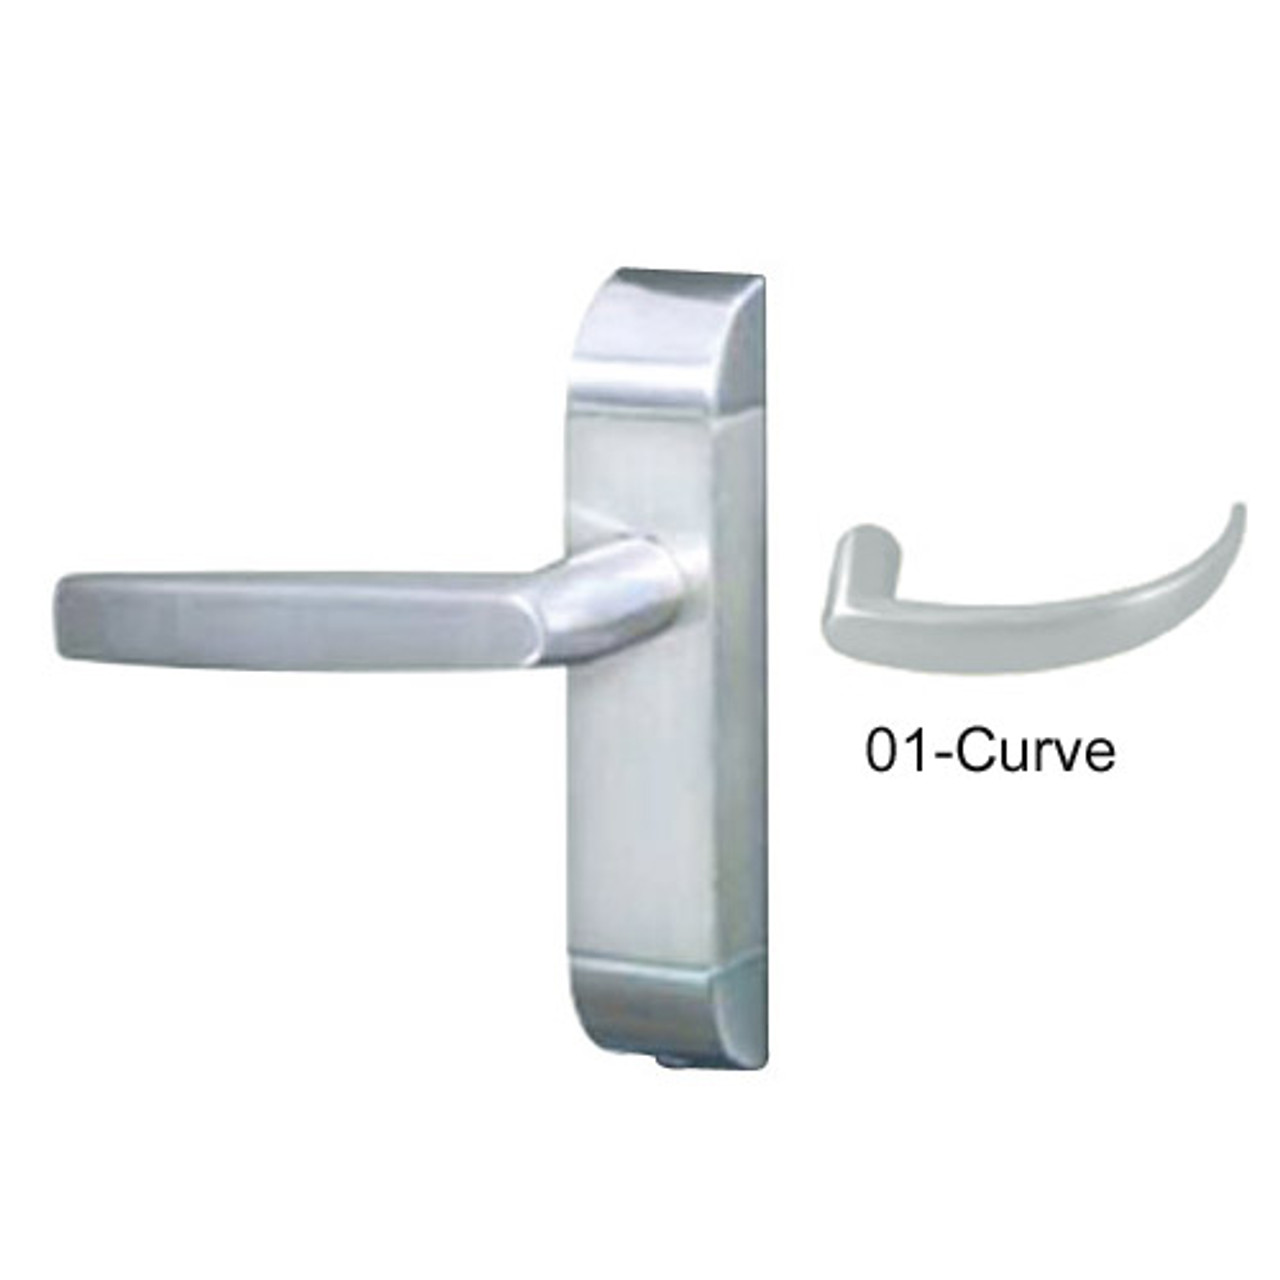 4600M-01-531-US32 Adams Rite Heavy Duty Curve Deadlatch Handles in Bright Stainless Finish